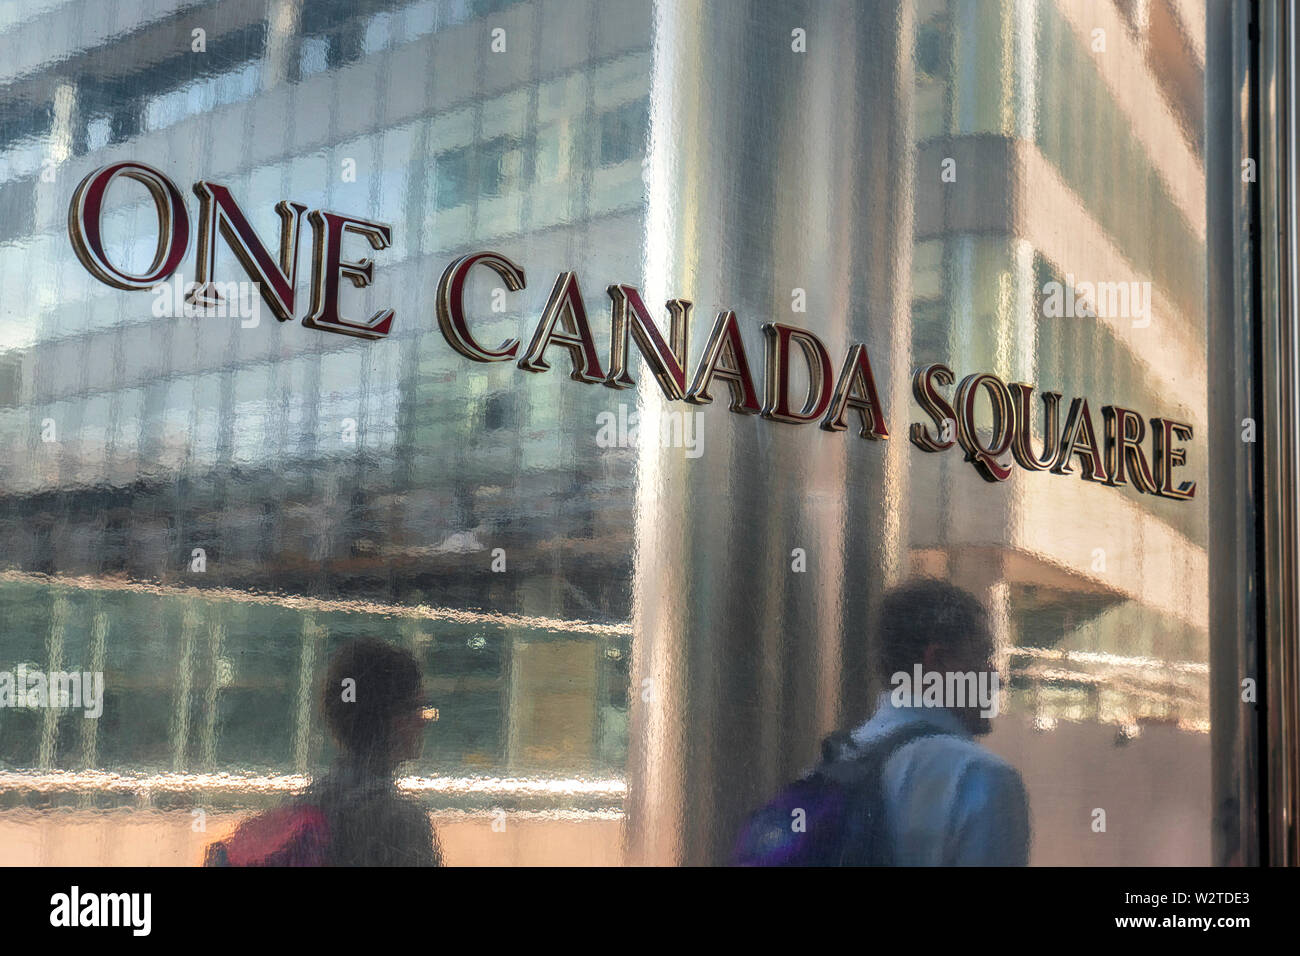 One Canada Square entrance plaque with walking city workers reflected in gloss metal surface outside the iconic tower One Canada Square in Canary Wharf London E14 Stock Photo